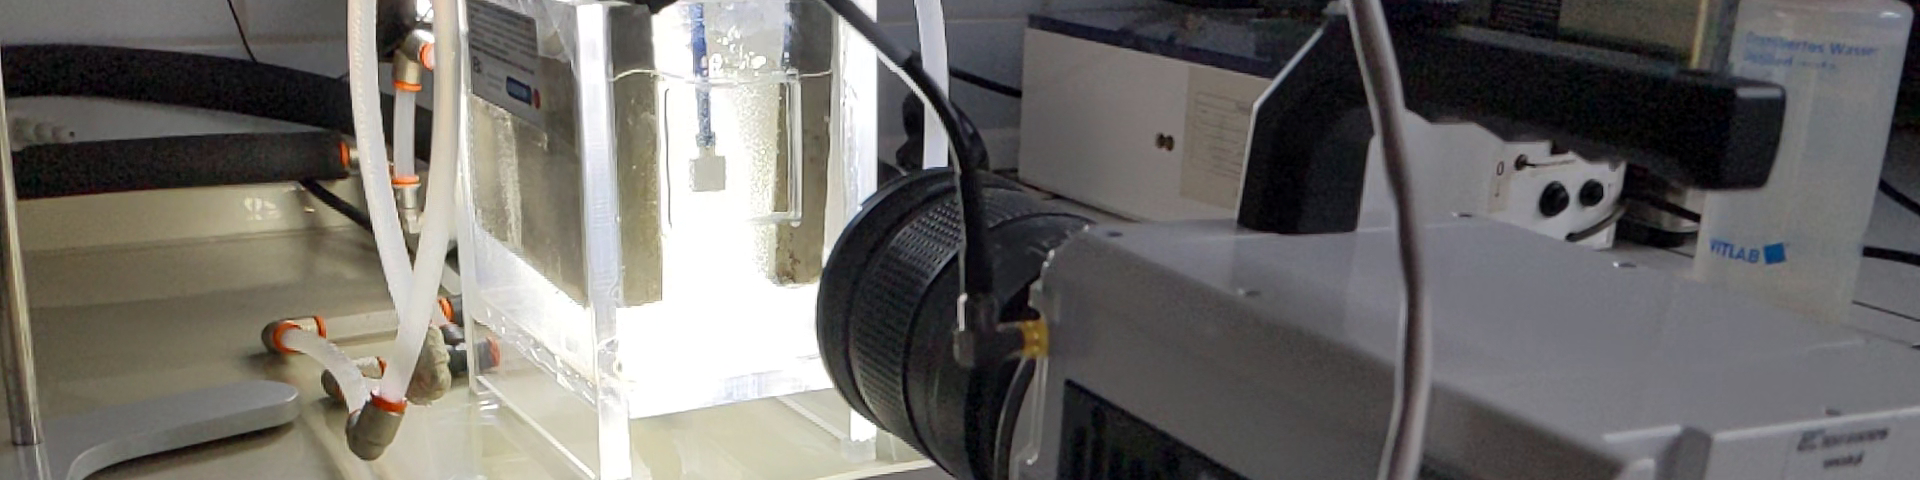 Analyzing PEO coatings using a high speed camera